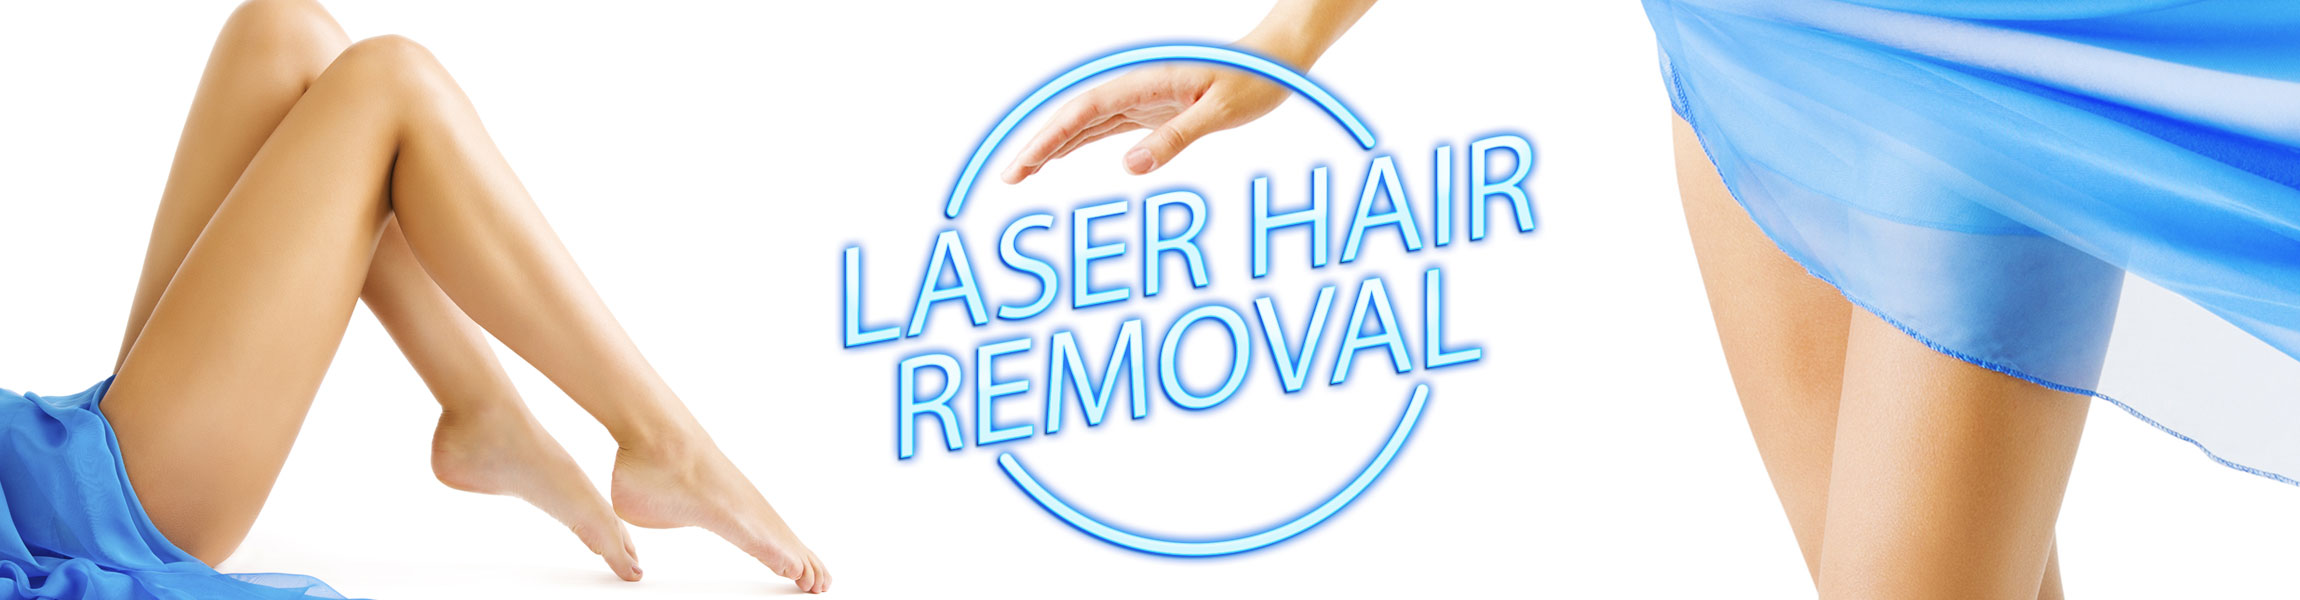 Laser Hair Removal EvelineCharles Salons Spas Beauty MD